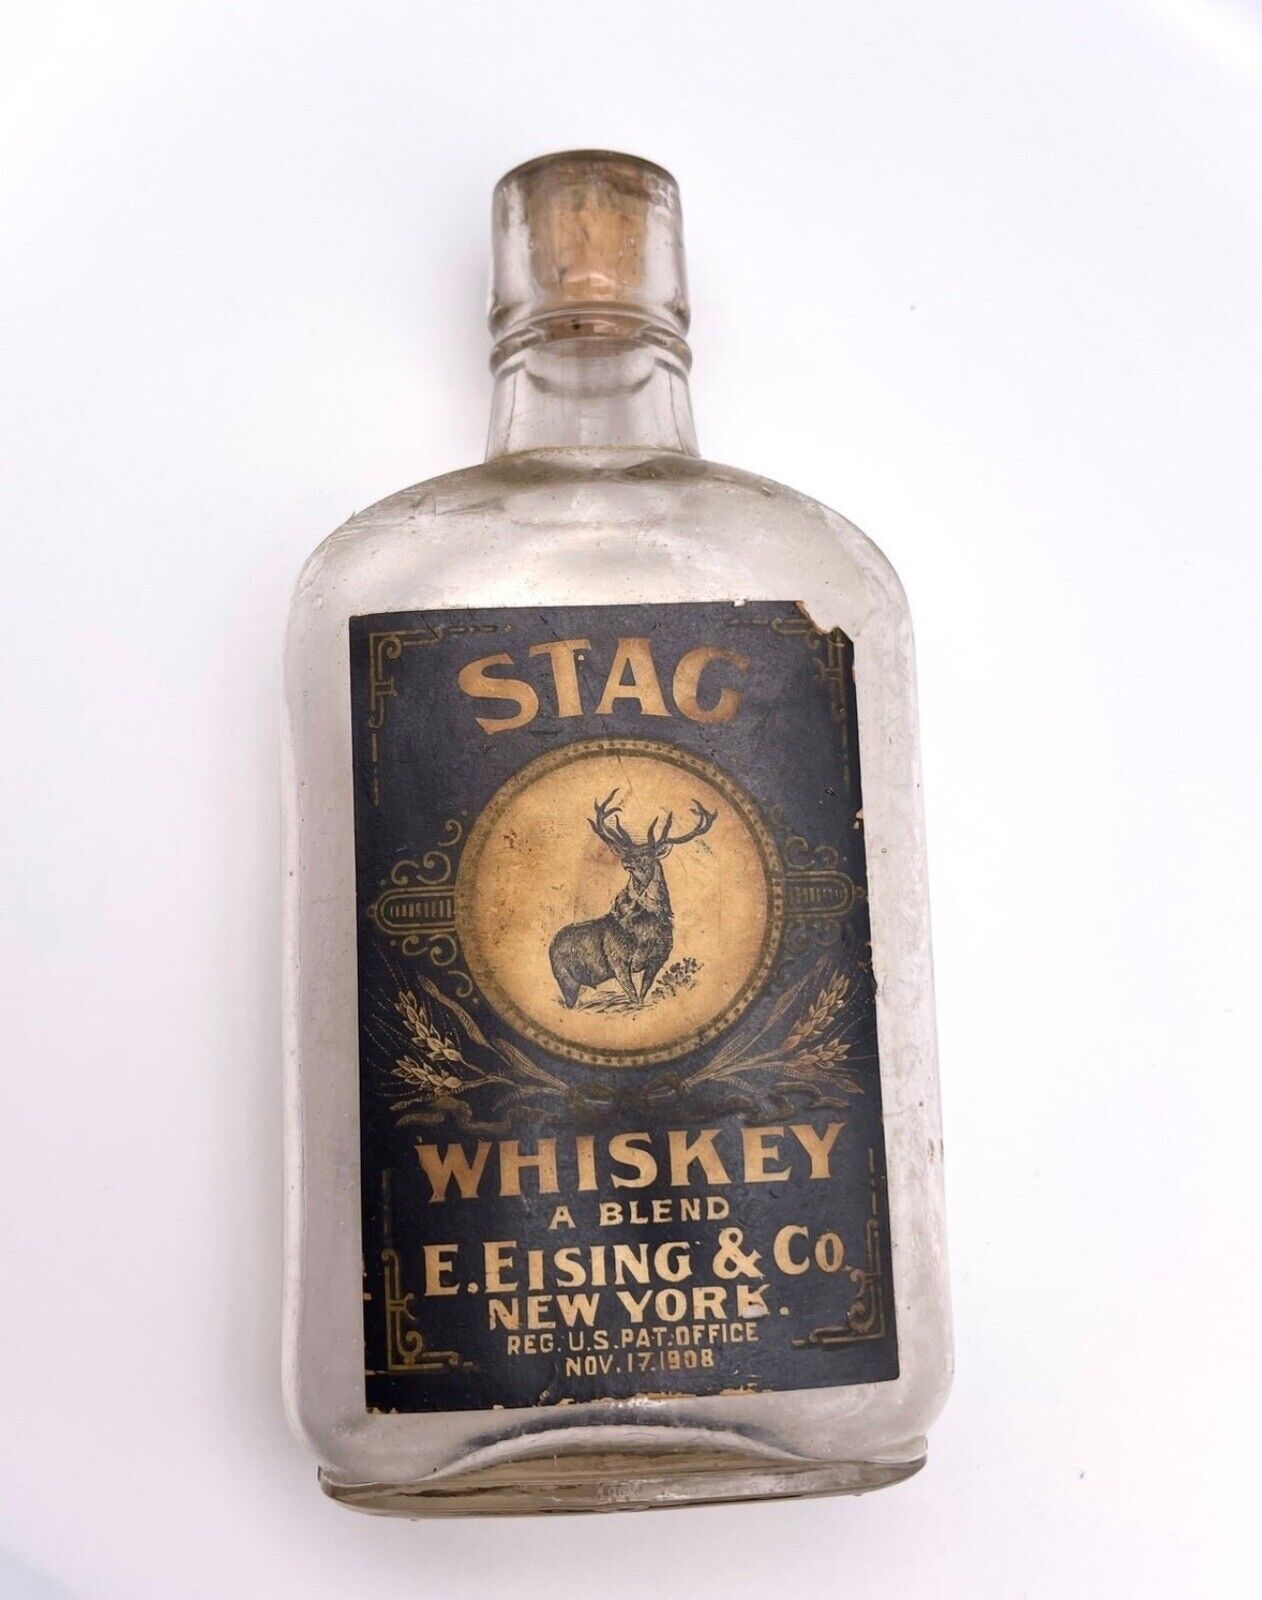 Vintage Stag Whiskey Bottle - Excellent Condition - 1908 - Cork Top